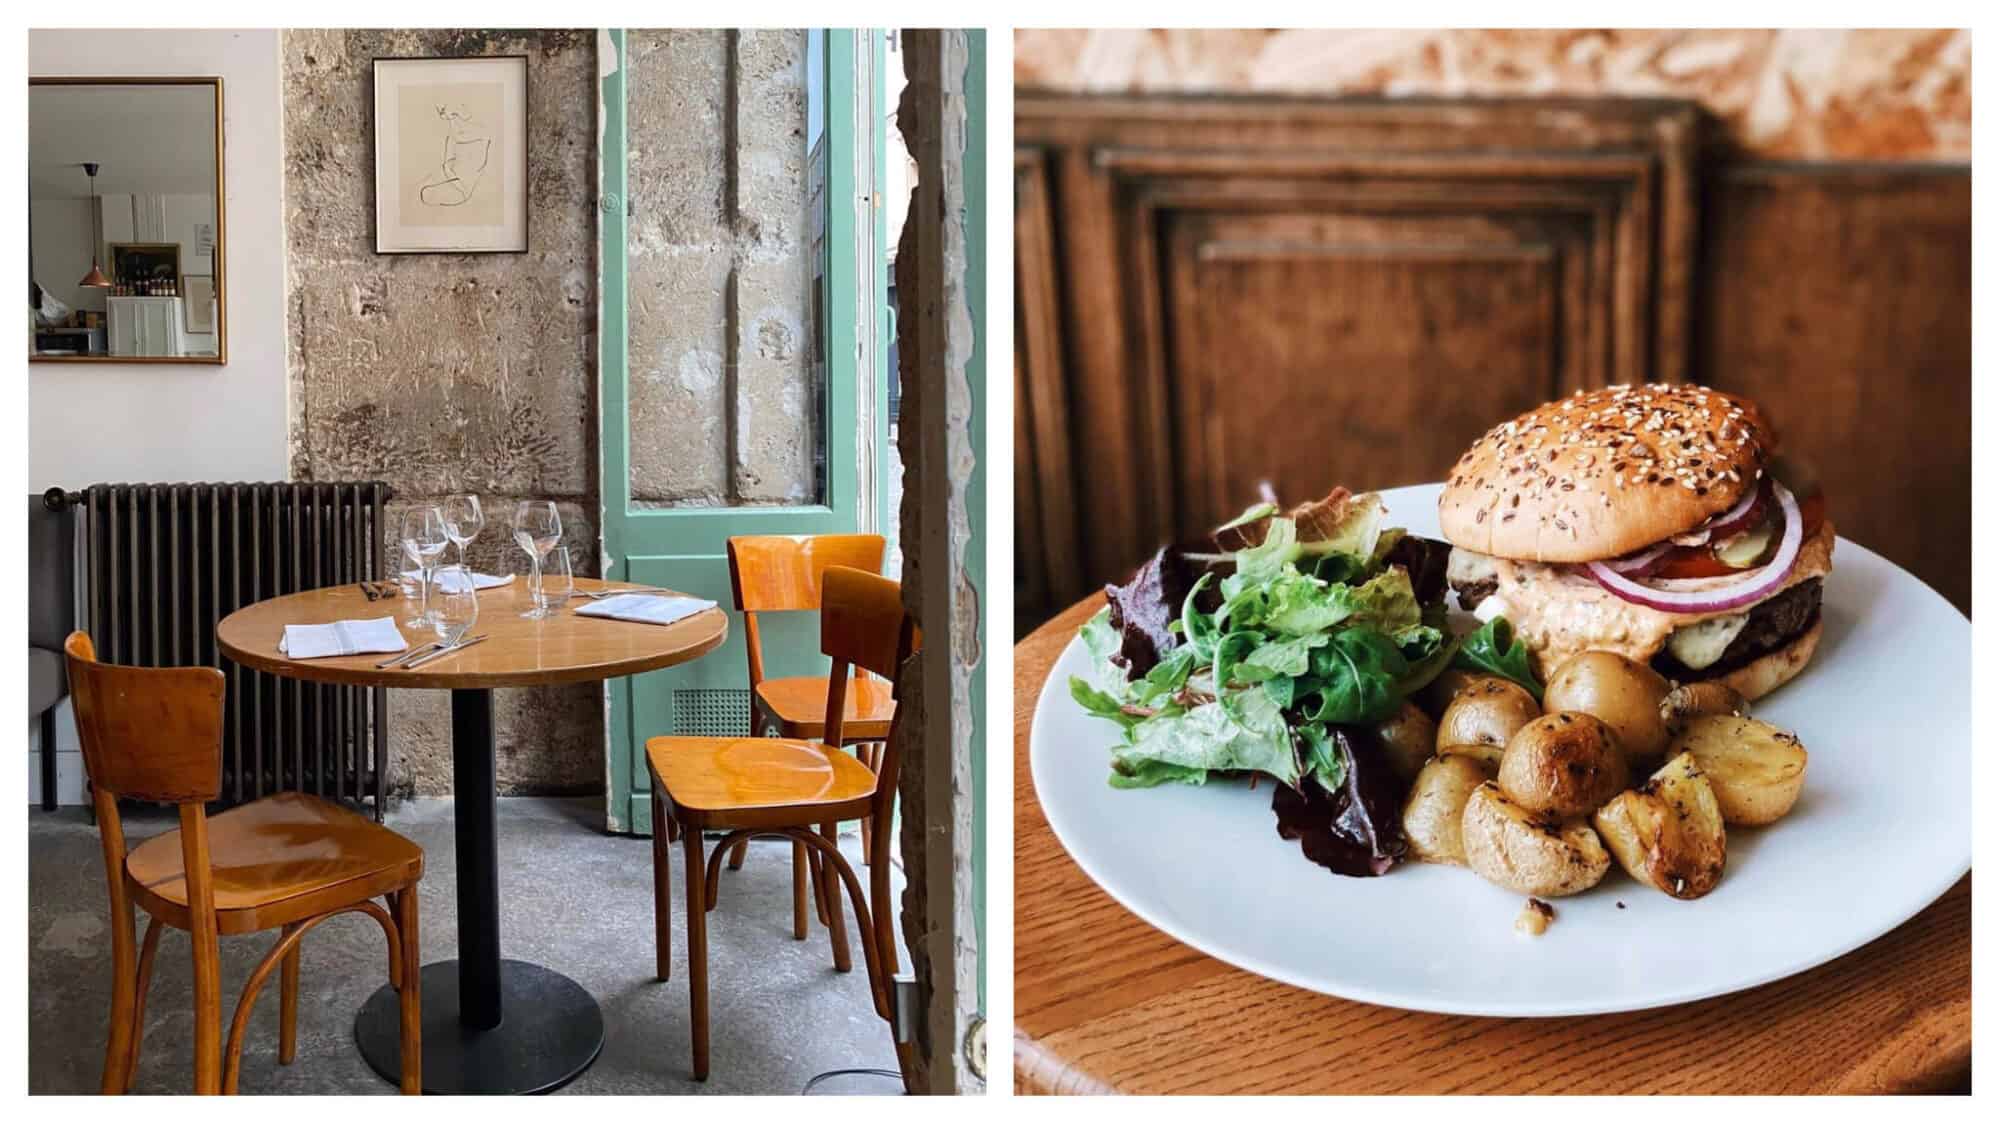 Left, a wooden table and chairs at a shabby chic style bistro in Paris. Right, an artisan cheese burger and fried potatoes on a white plate.